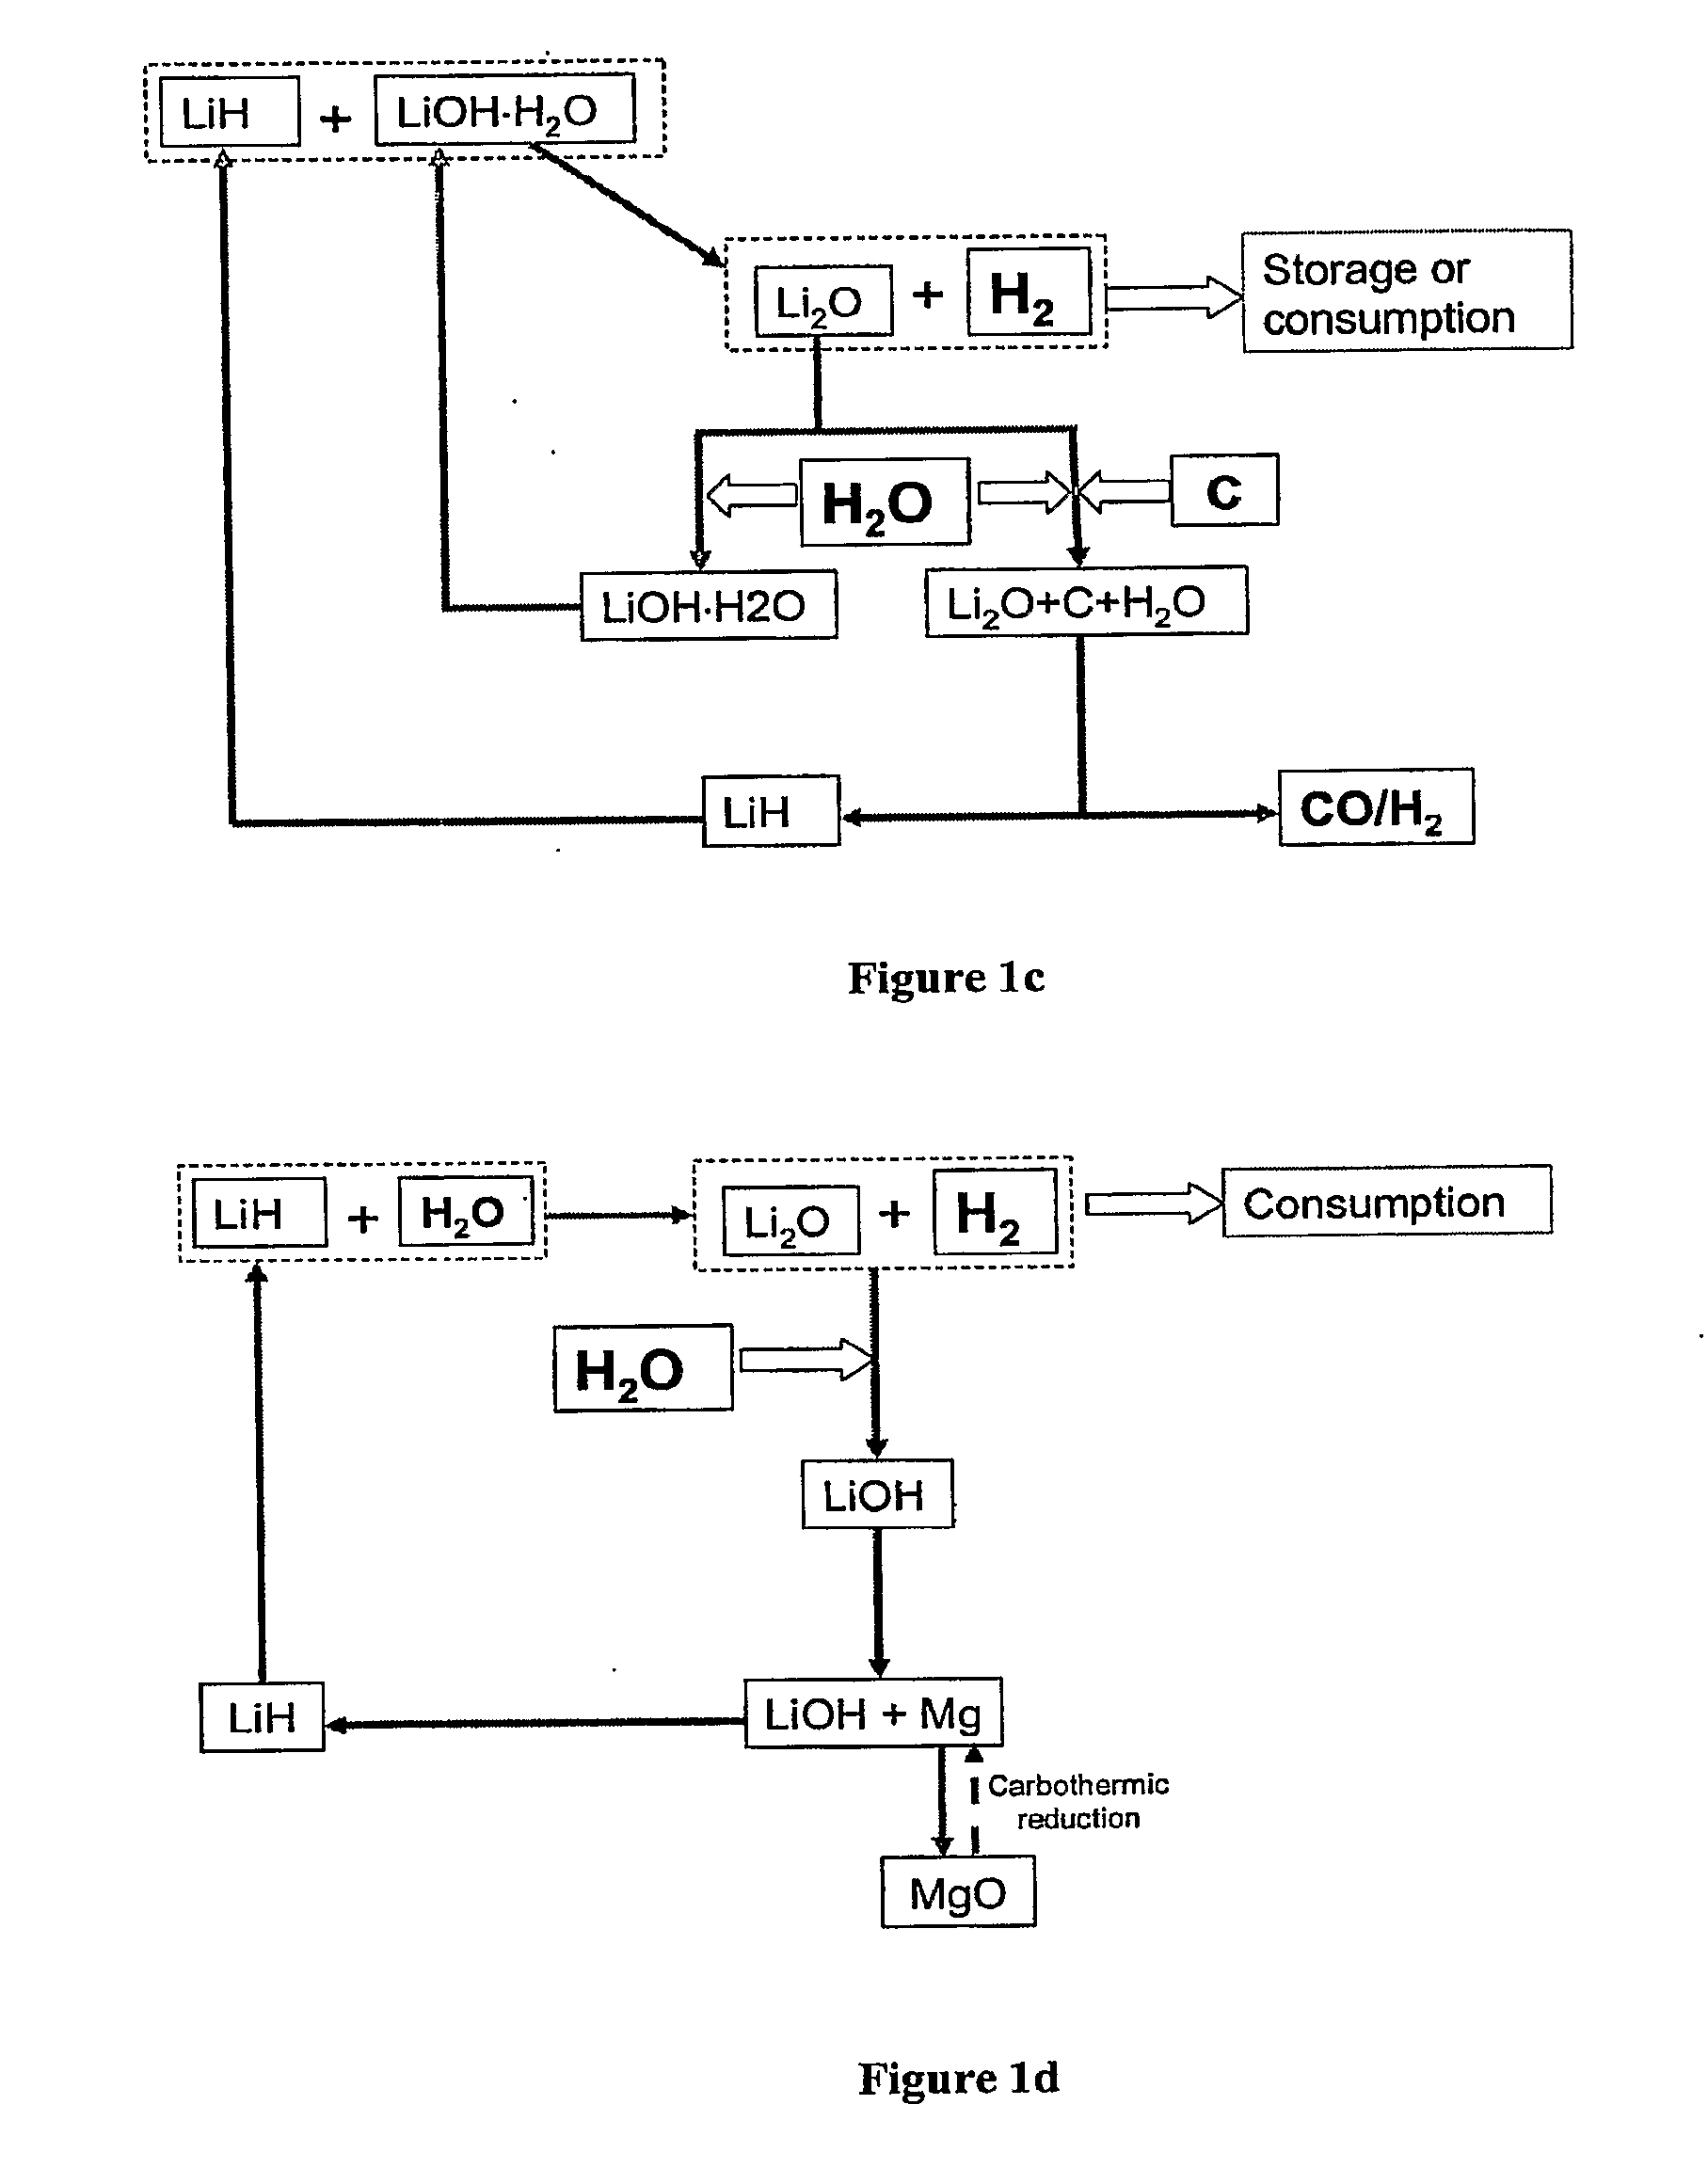 Systems and Methods for Hydrogen Storage and Generation from Water Using Lithium Based Materials